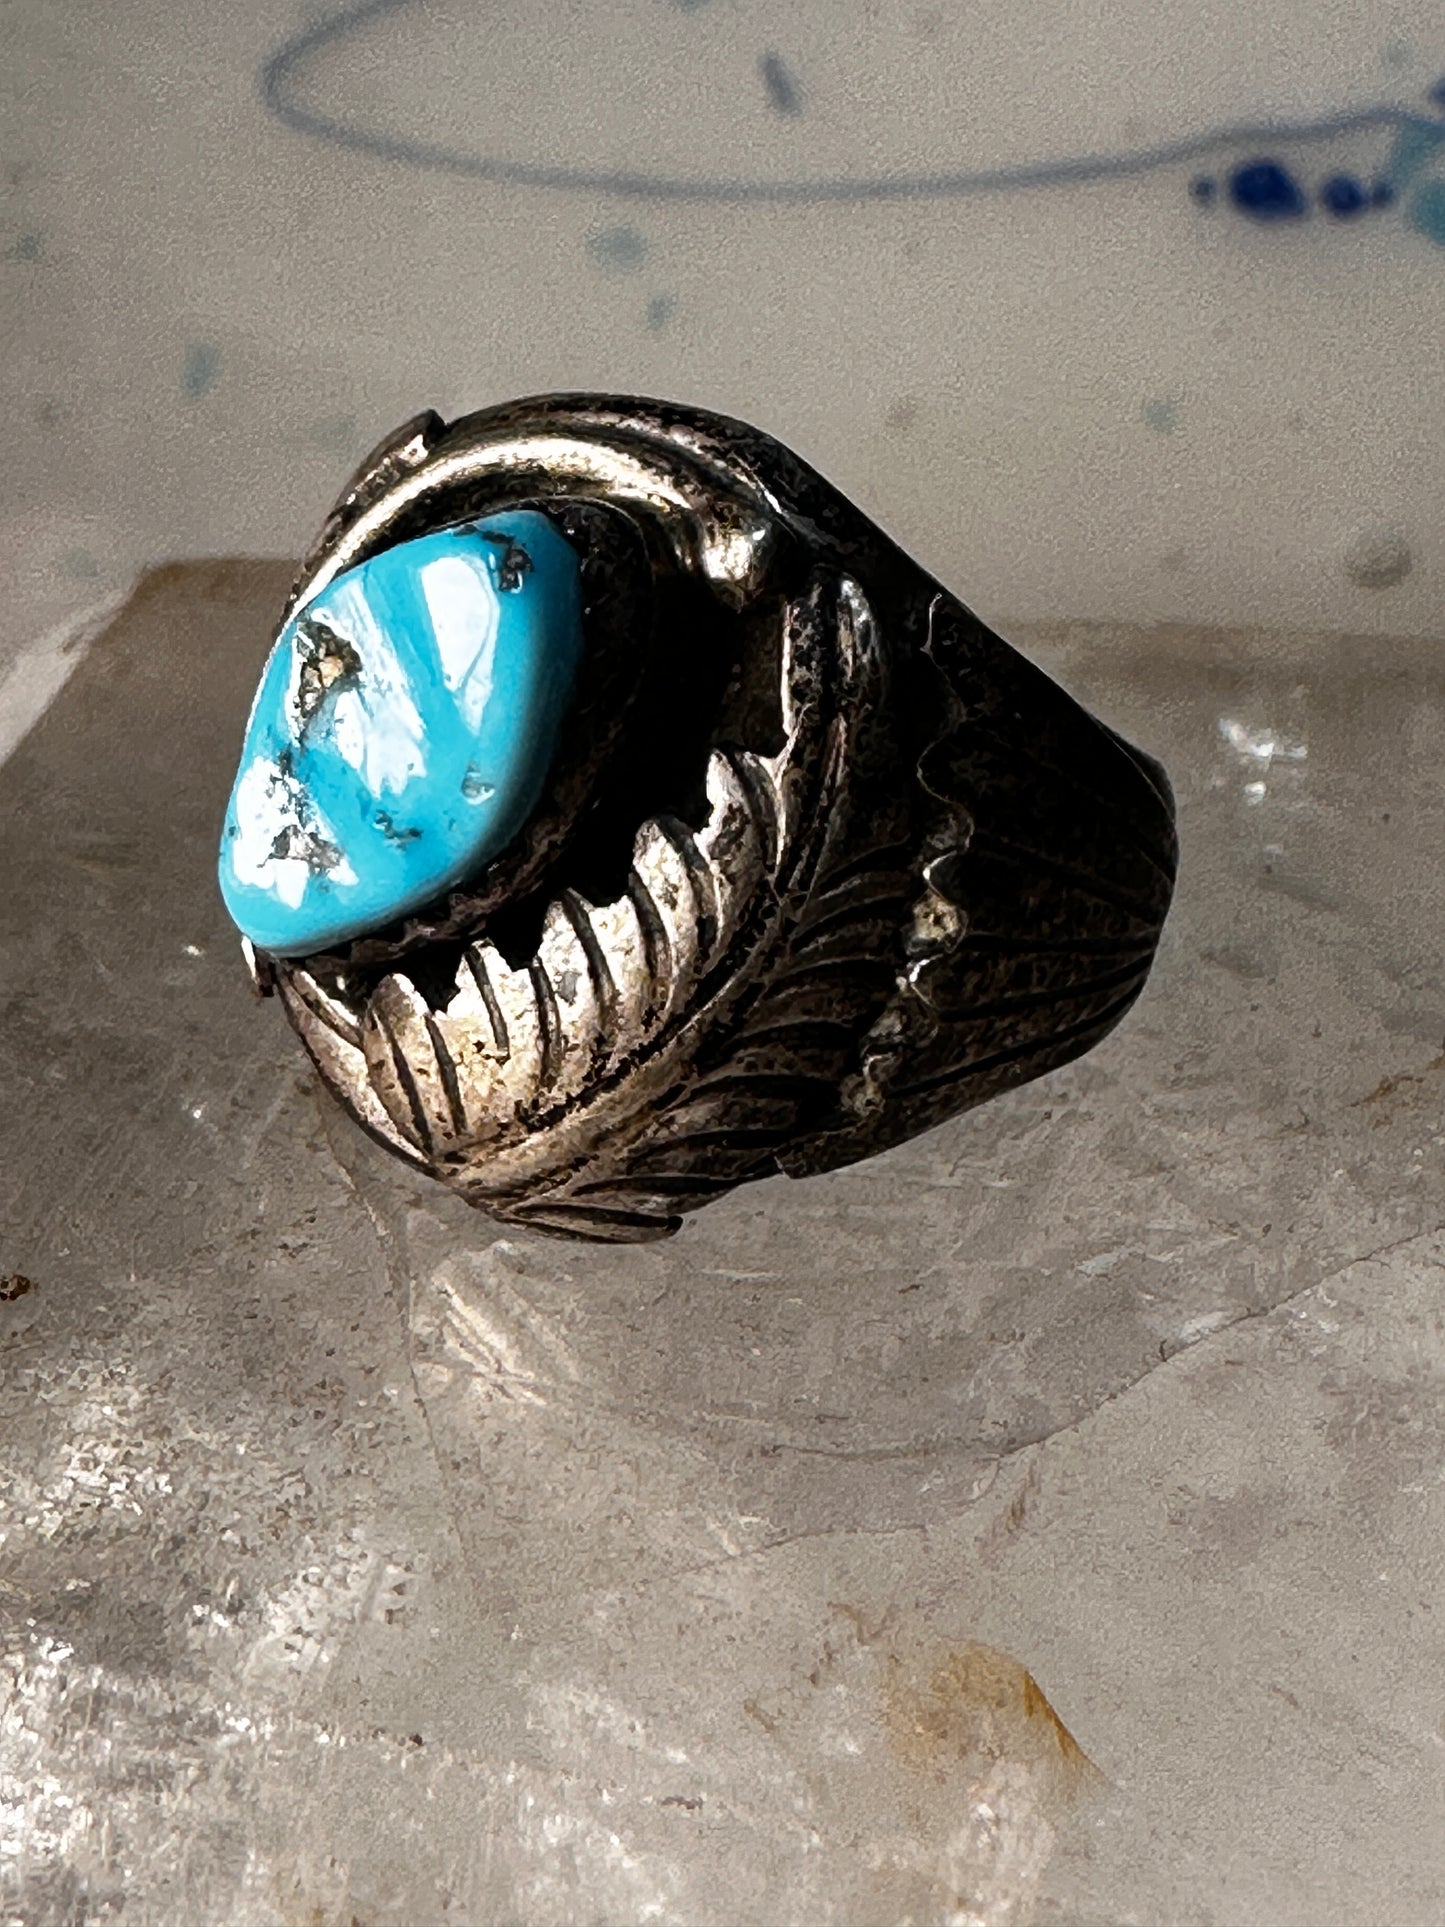 Navajo ring Turquoise band feather  size 9.75 sterling silver men women